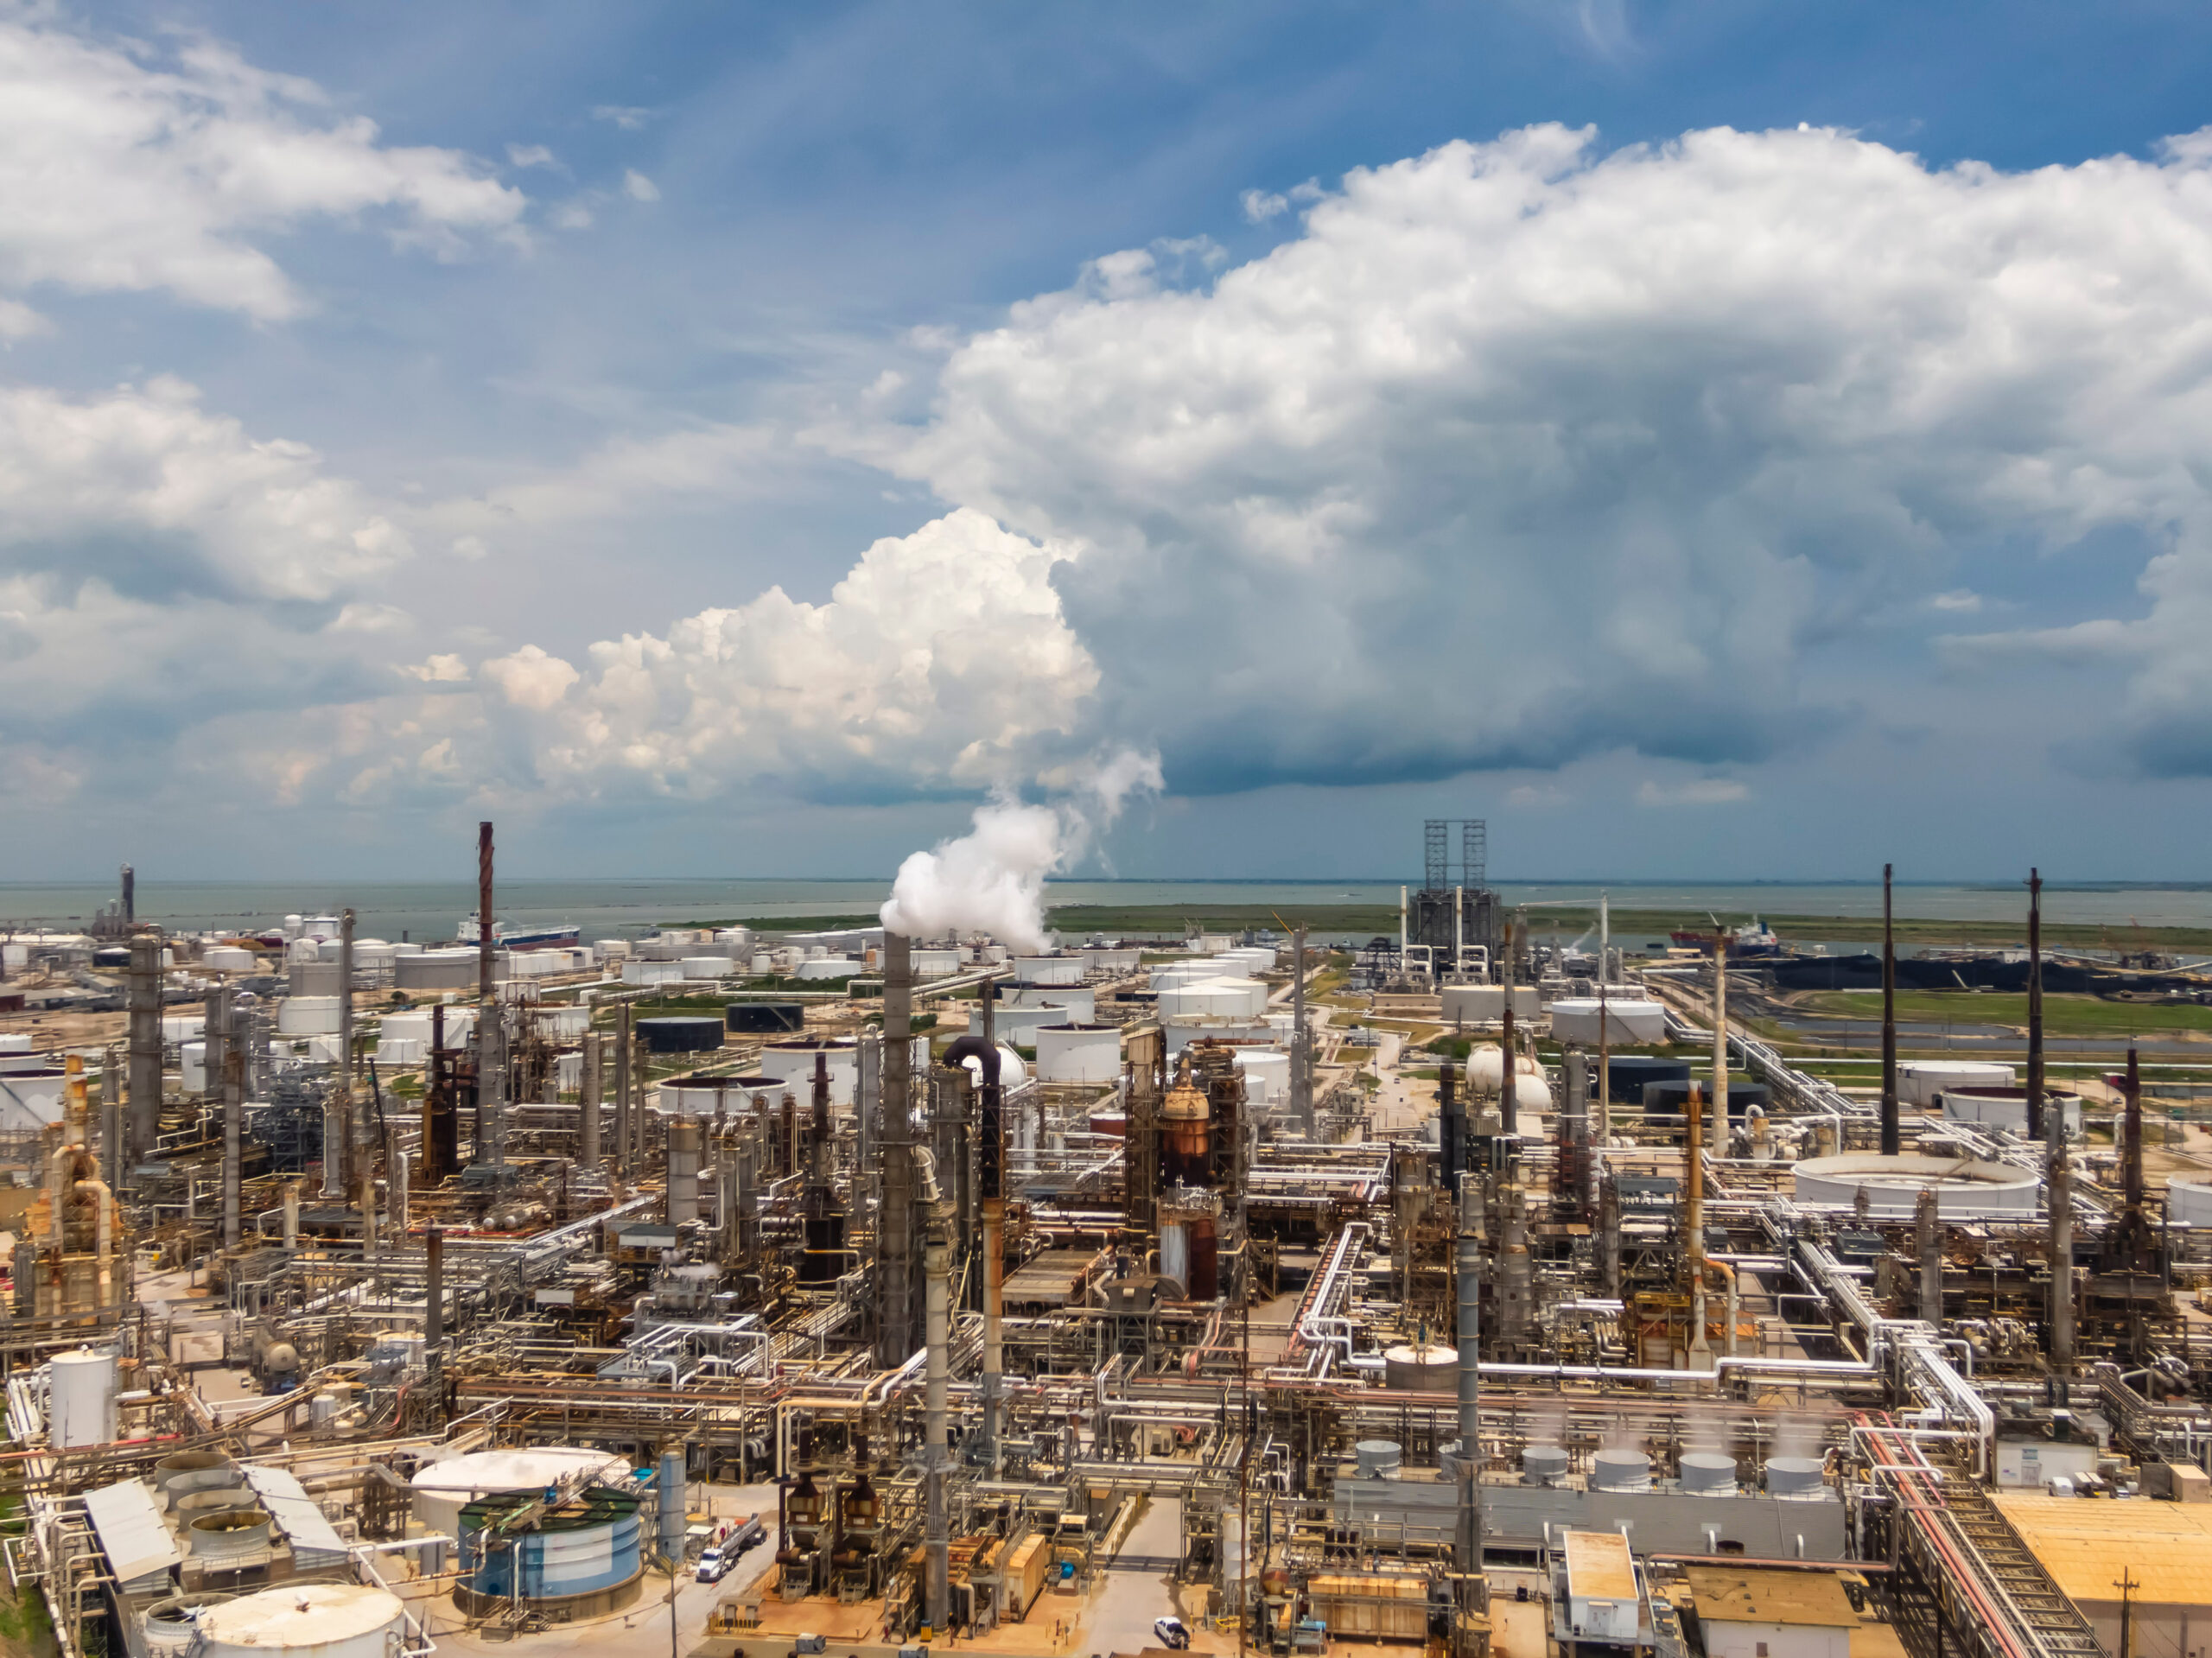 An aerial view of an oil and gas refinery on the Gulf Coast in Texas City. Smokestacks and storage containers dot the landscape under a partly cloudy sky.